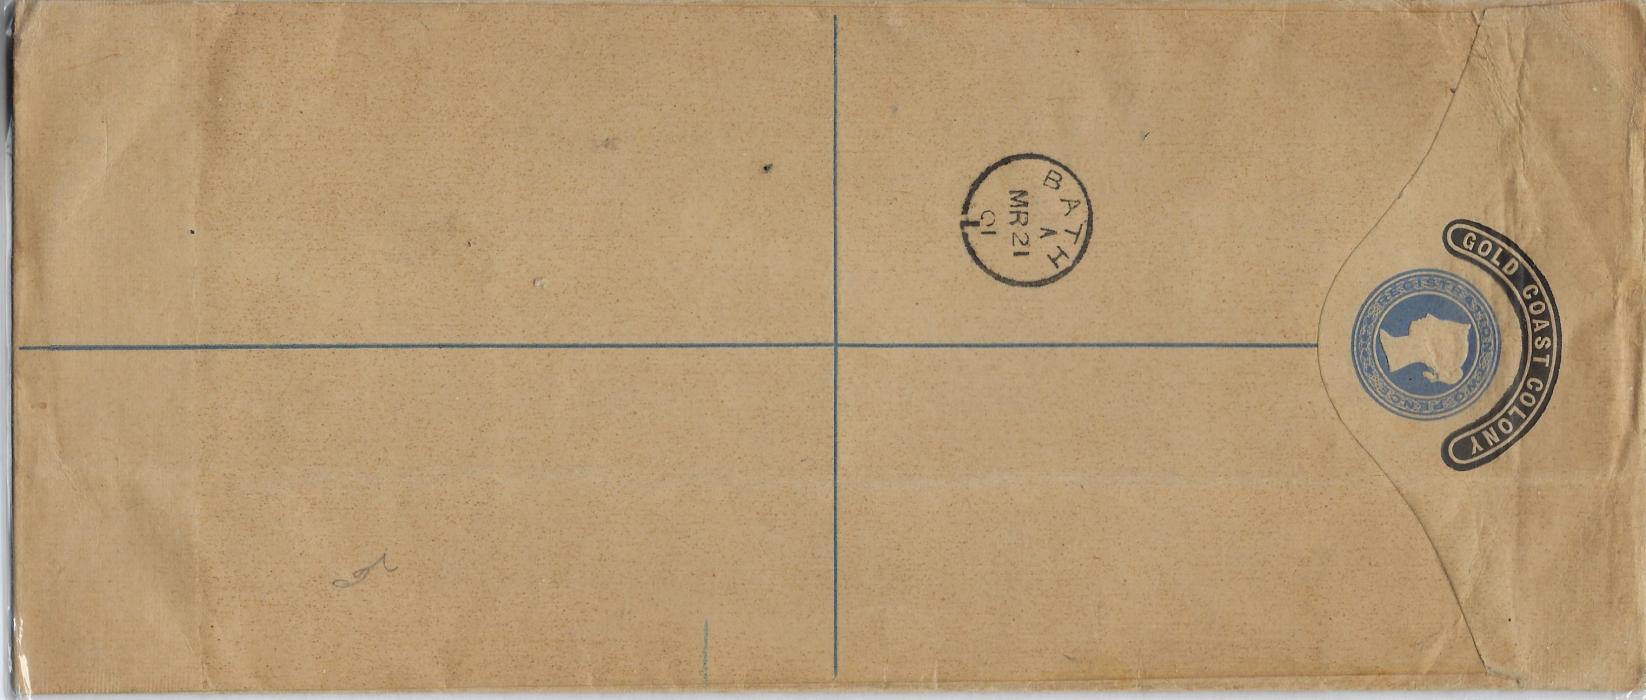 Gold Coast 1901 (FE 14) 2d. registration envelope, size H2, uprated with mixed issue 1d. and 2d. to Bath, tied Accra cds, Liverpool transit cds at left, arrival backstamp; fine unfolded.